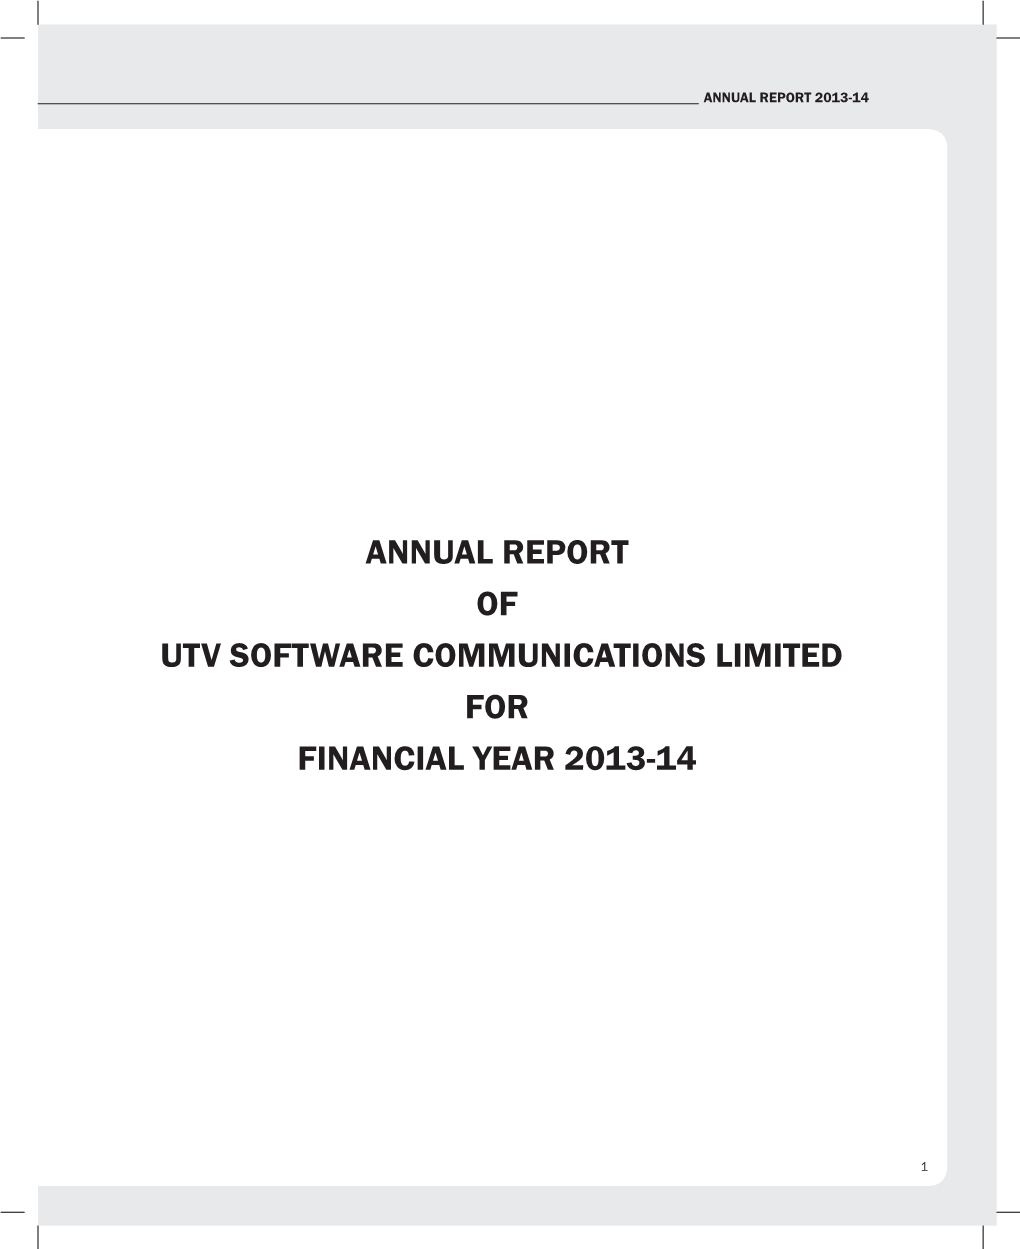 Annual Report of Utv Software Communications Limited for Financial Year 2013-14